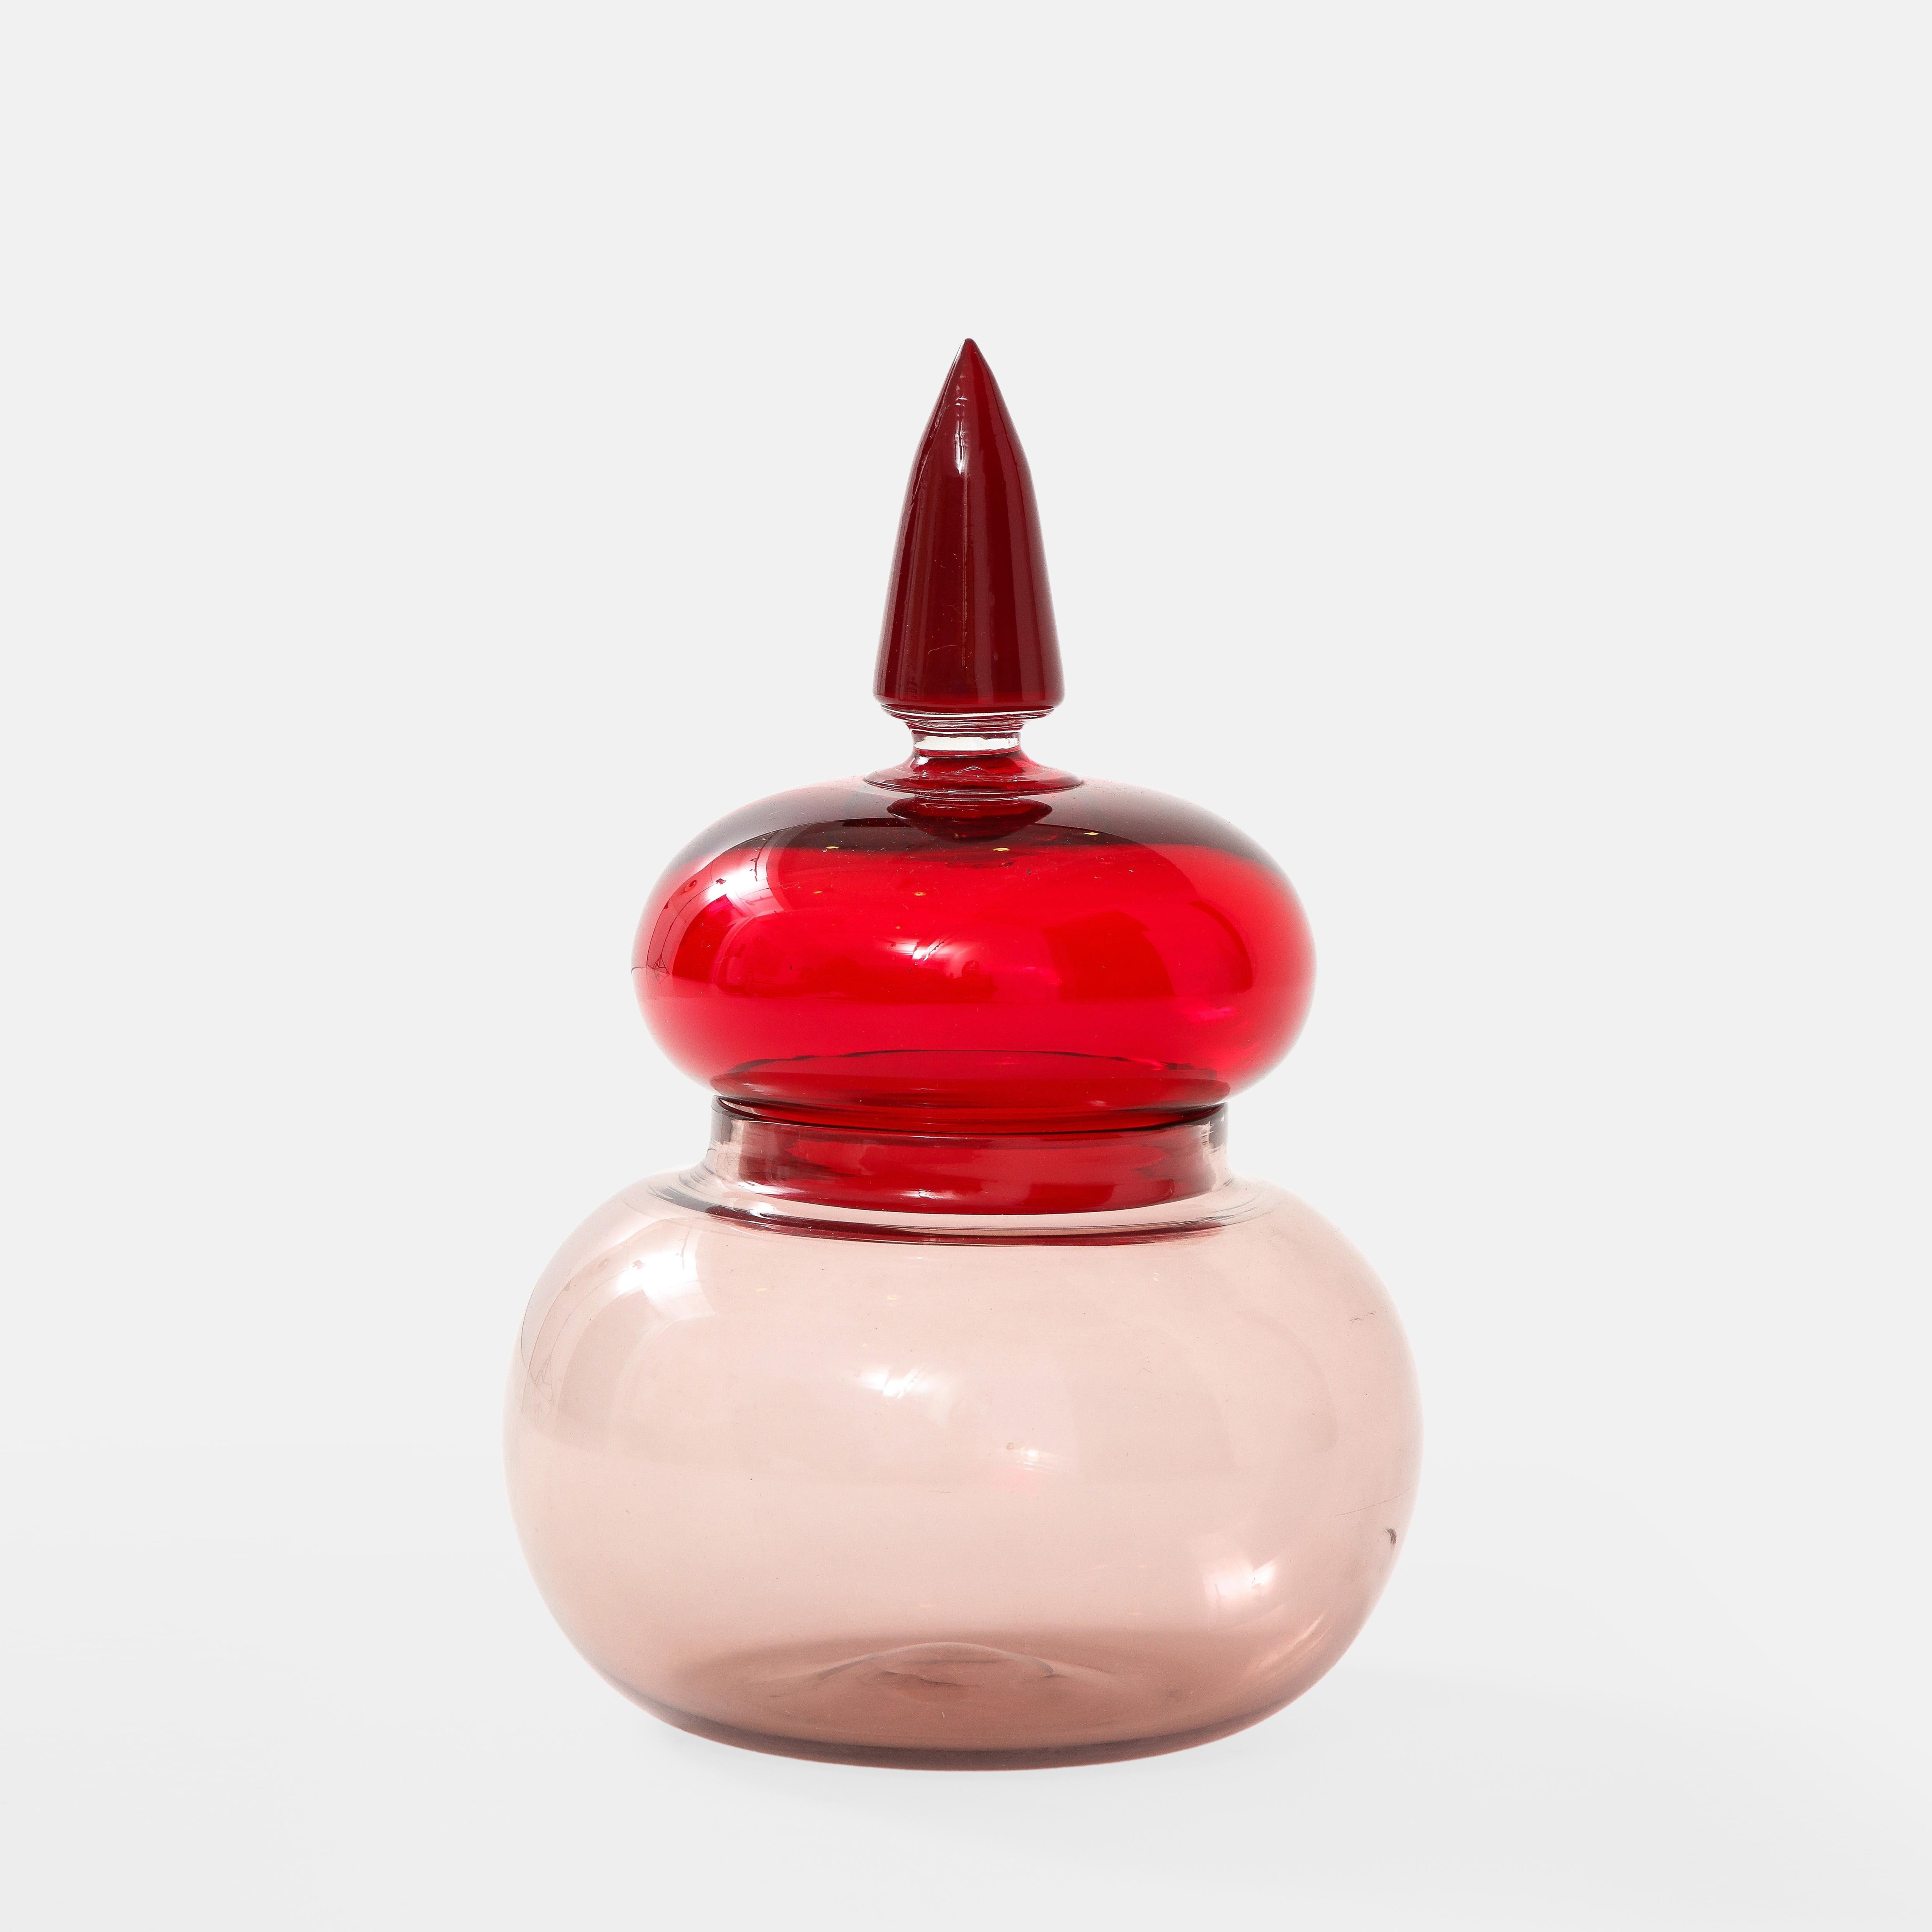 Paolo Venini for Venini rare apothecary jar or vessel in red and mauve blown glass.  This classic and elegant vessel comes from a series designed by Paolo Venini in 1959 inspired by apothecary jars from the 19th century.  
Three-line acid stamp to